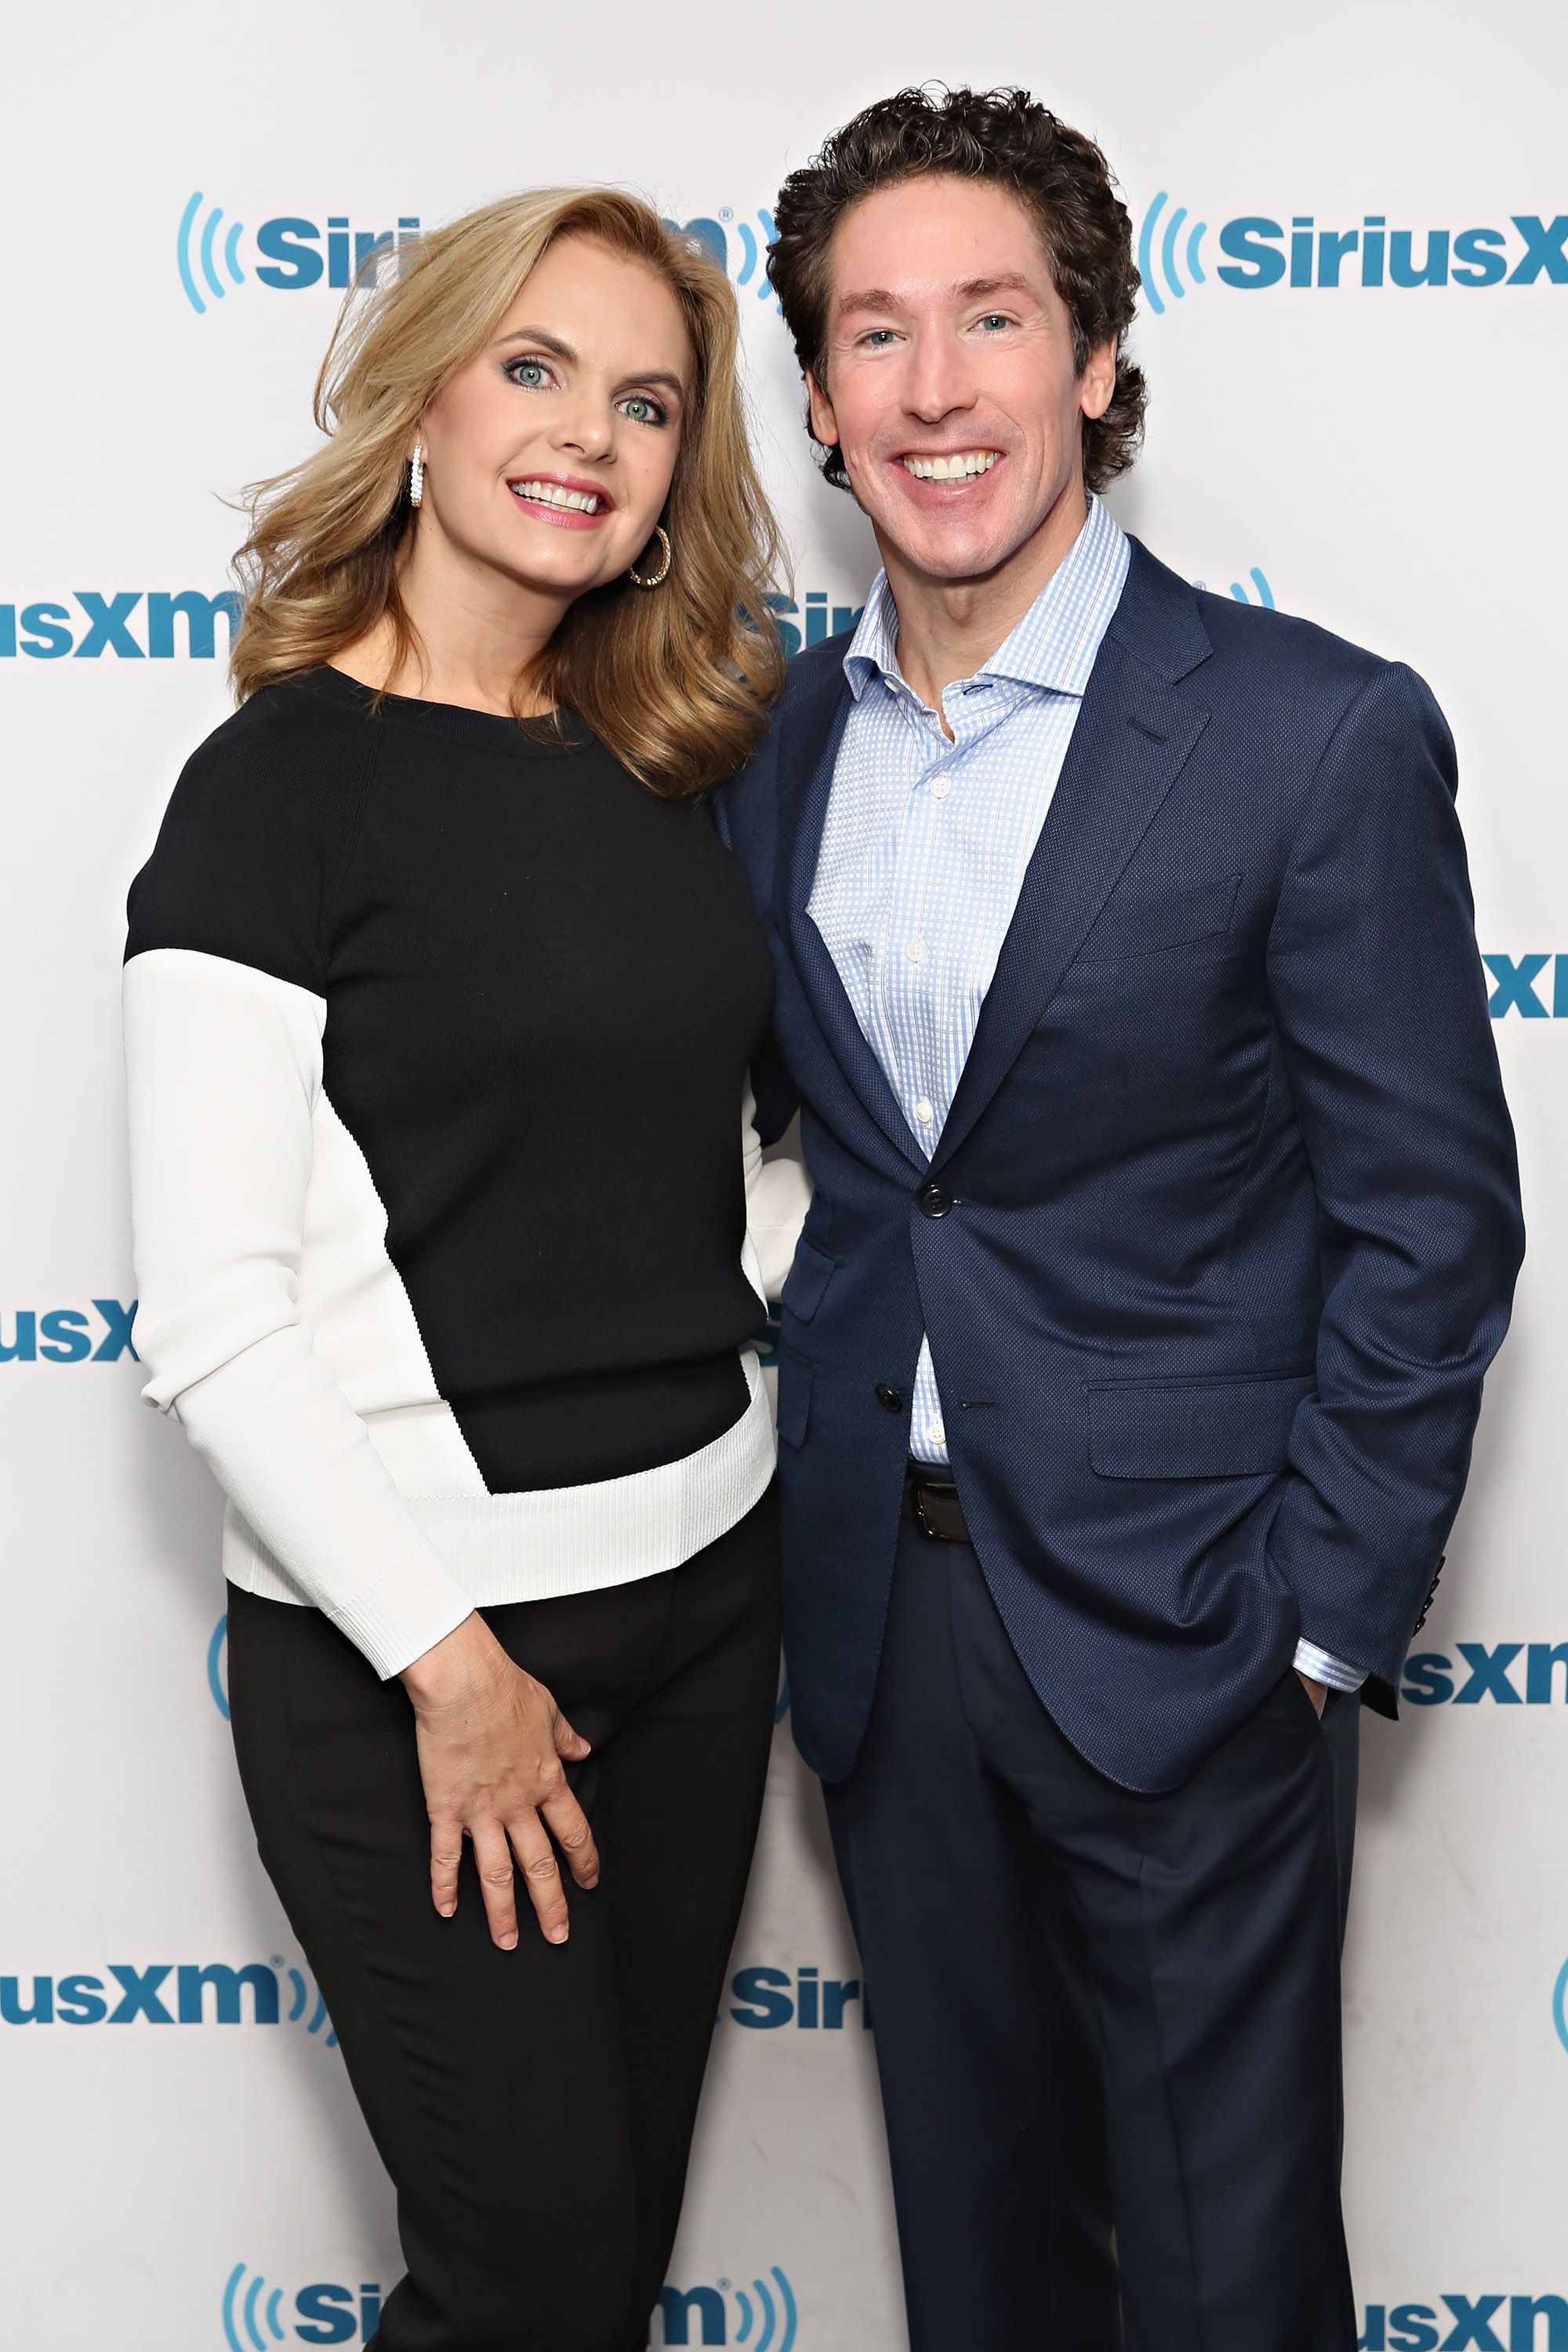 Victoria and Joel Osteen participate in 'Joel Osteen Live' at SiriusXM Studios in 2016 in New York City | Source: Getty Images